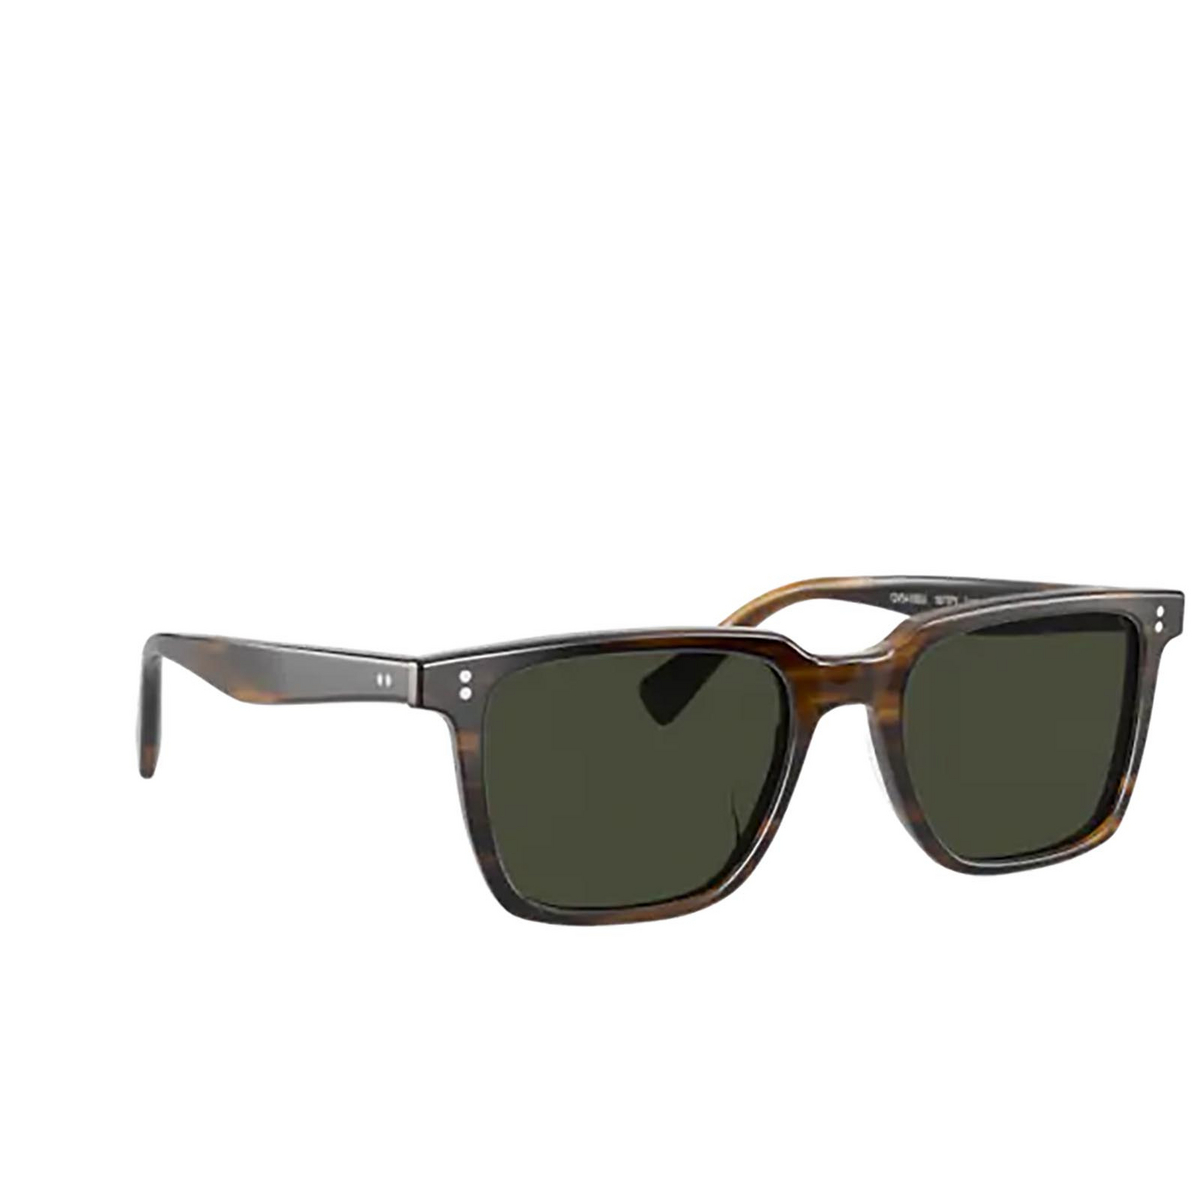 Oliver Peoples LACHMAN Sunglasses 1677P1 Bark - three-quarters view